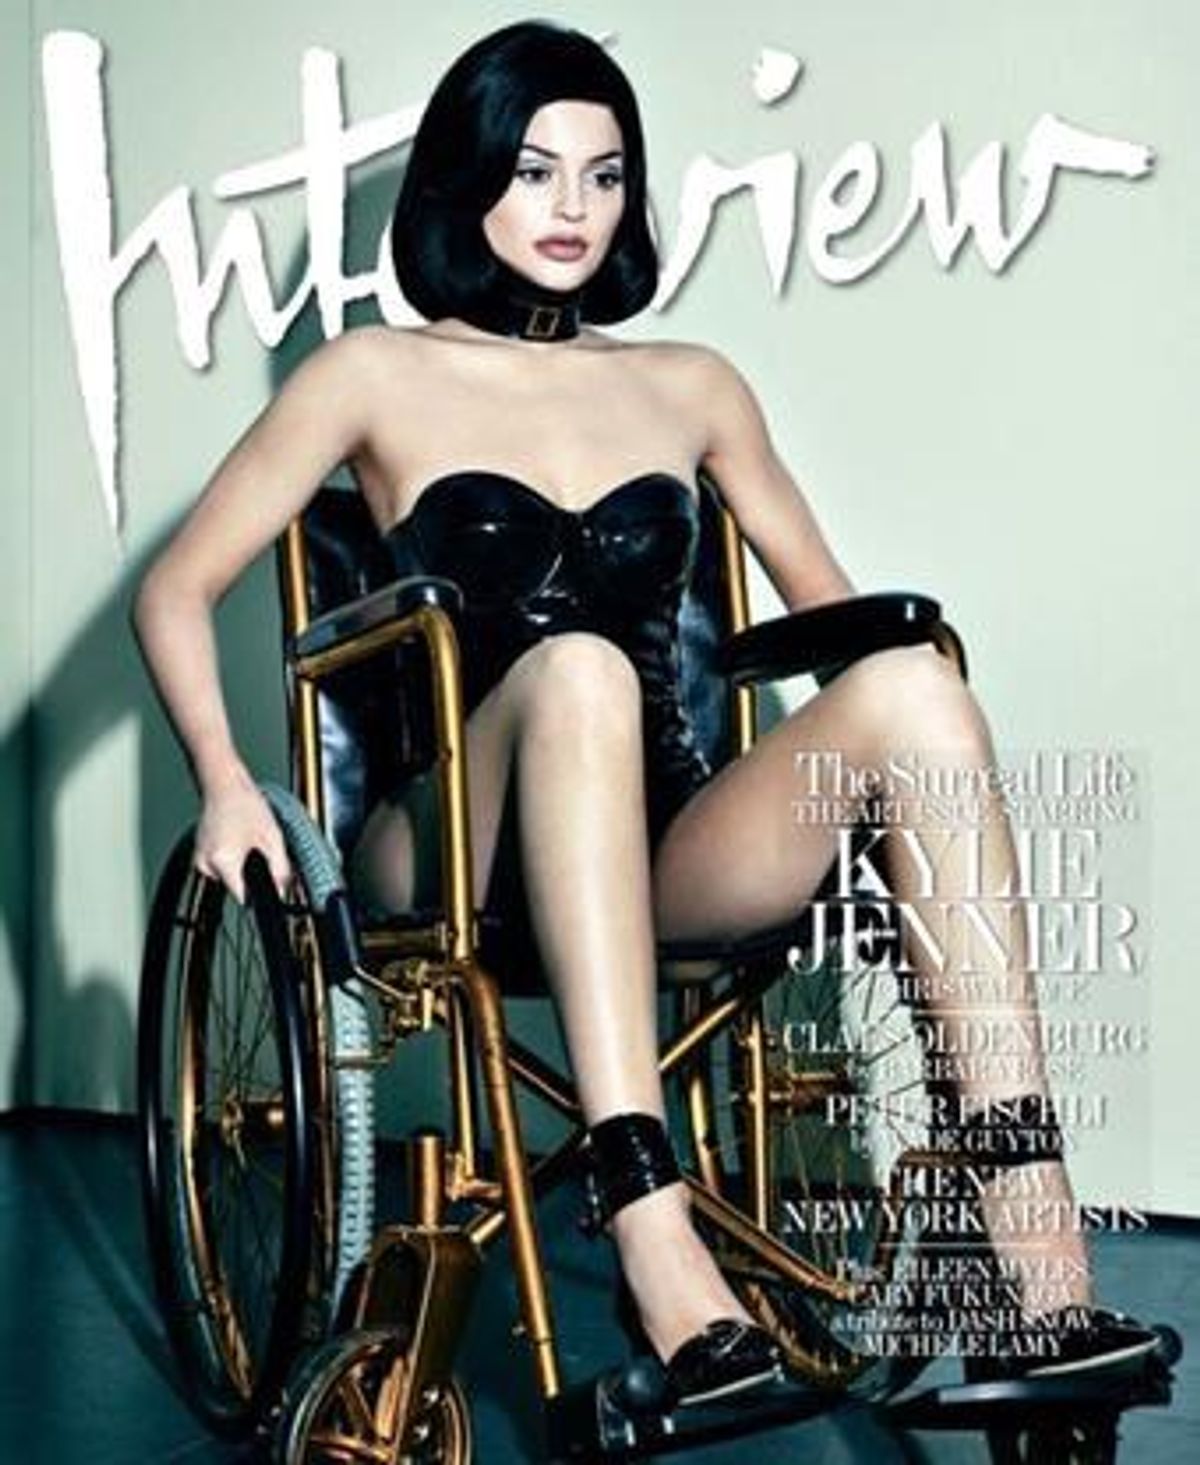 Why We Need To Talk About Kylie Jenner's Latest Photoshoot